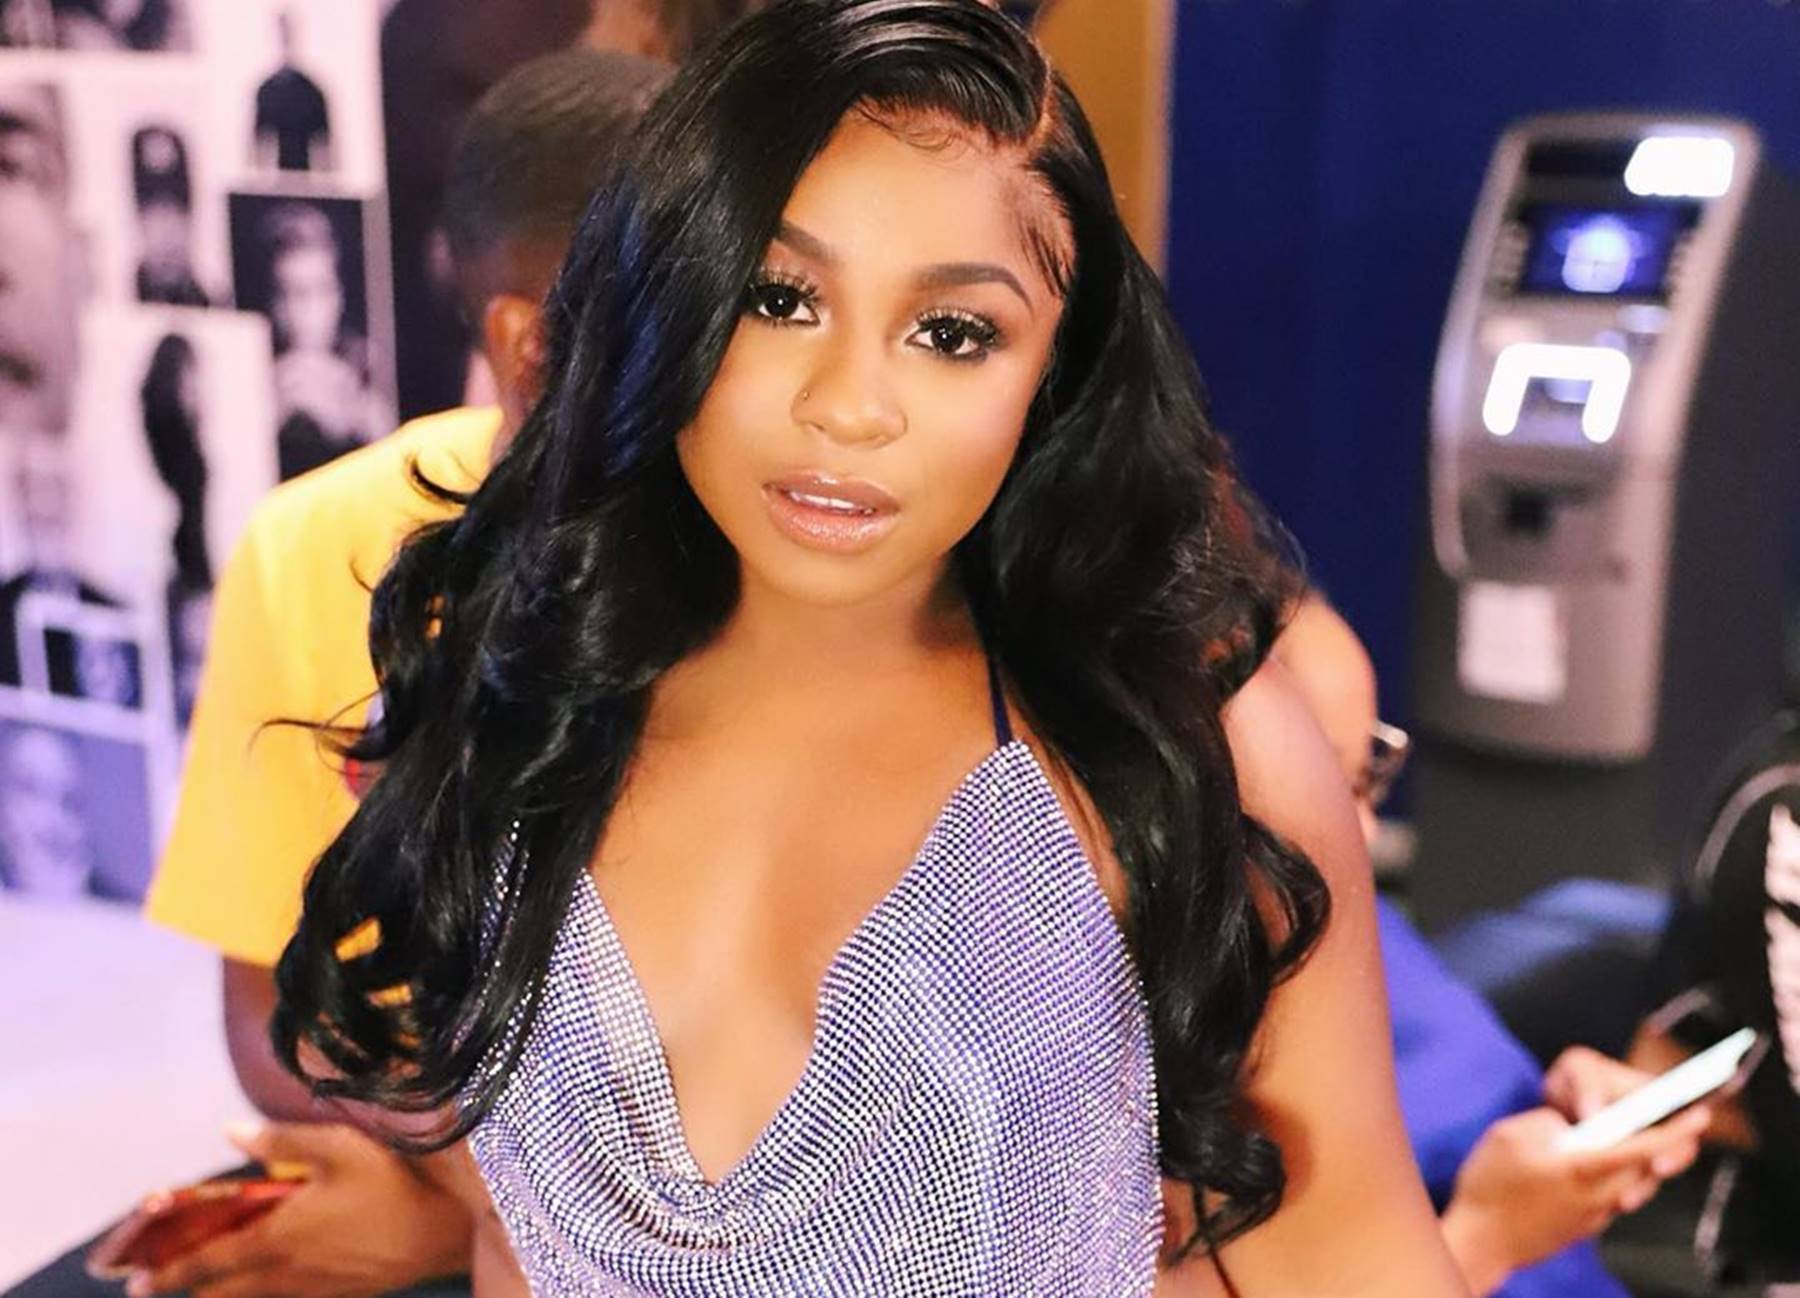 Reginae Carter's Dance In This Pink Skimpy Pink Outfit Has Fans Crazy With Excitement - Check Out Her Video